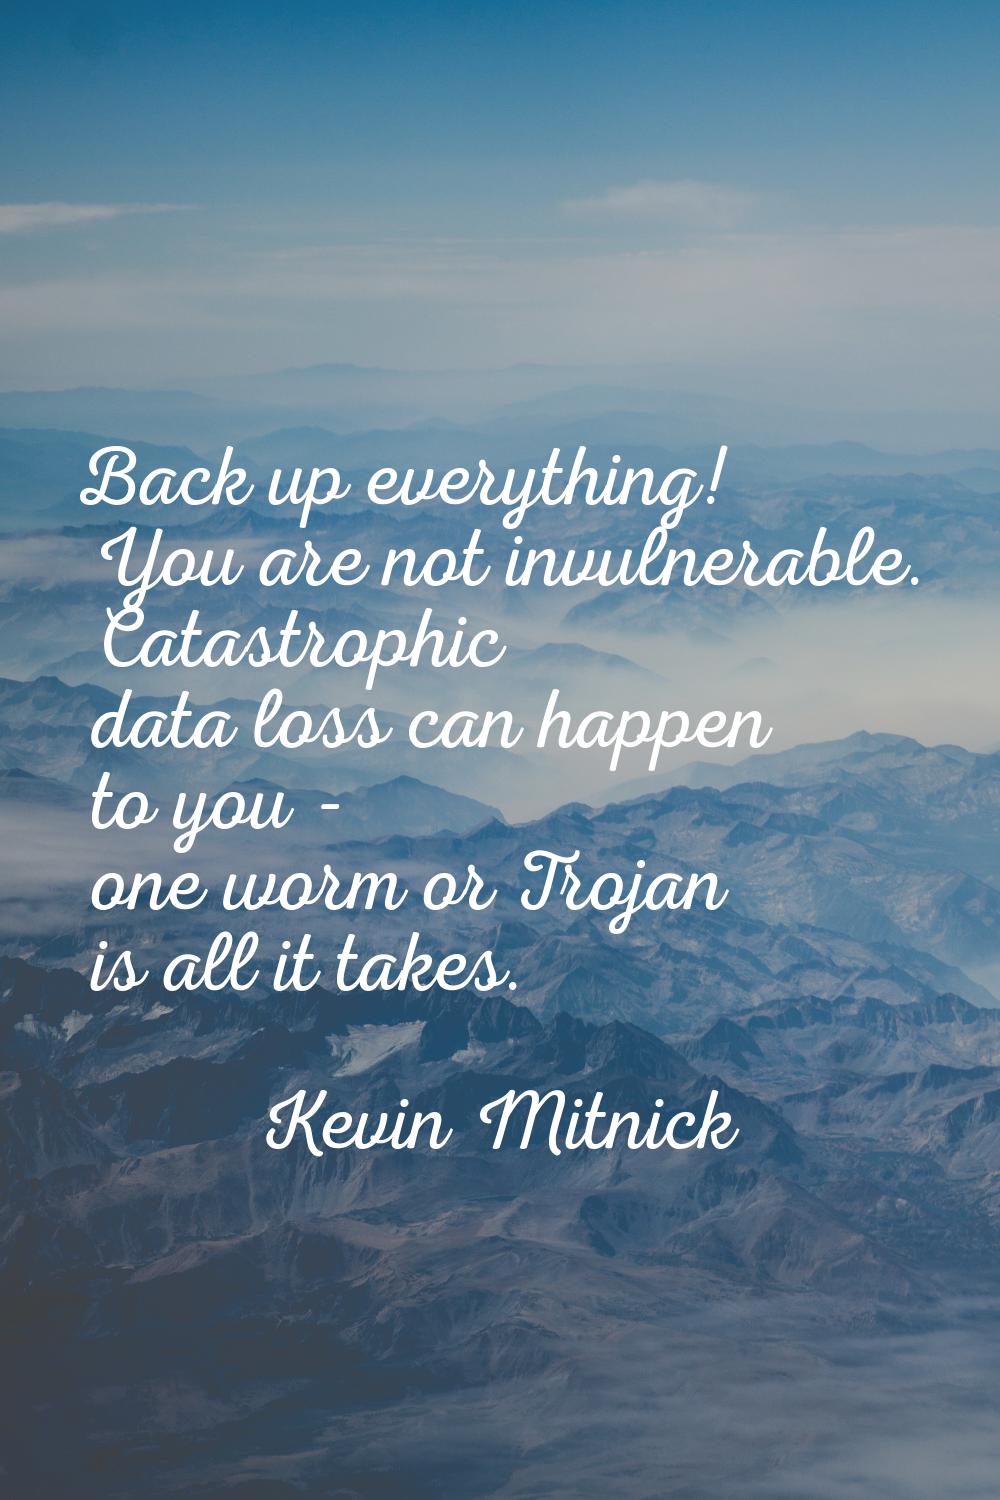 Back up everything! You are not invulnerable. Catastrophic data loss can happen to you - one worm o